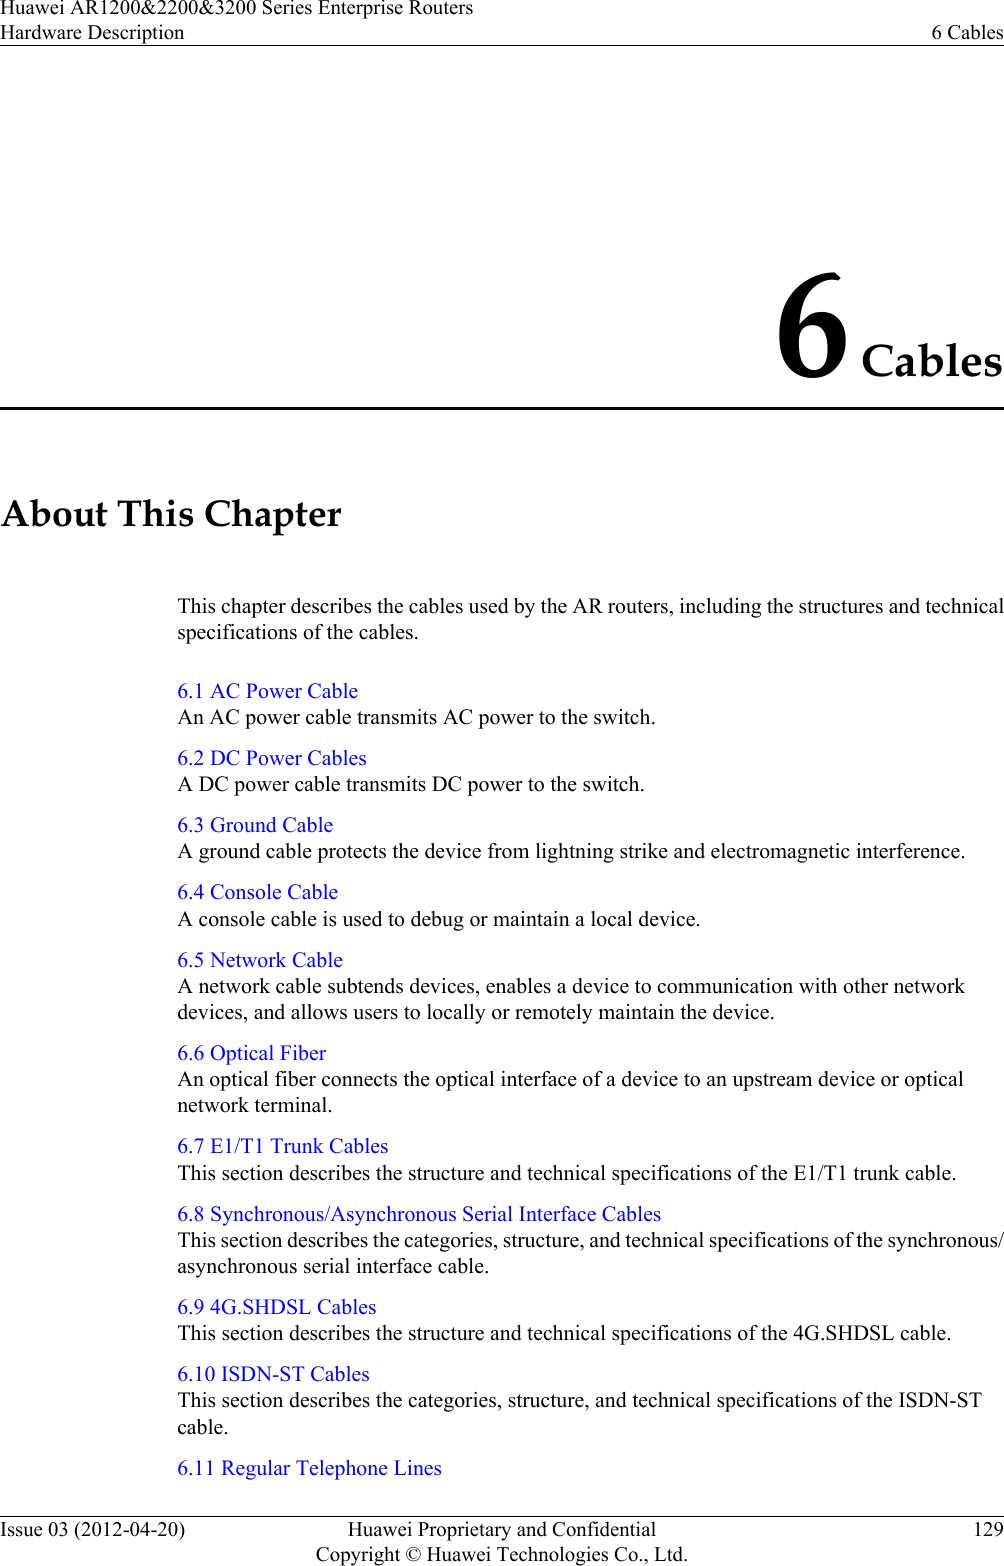 6 CablesAbout This ChapterThis chapter describes the cables used by the AR routers, including the structures and technicalspecifications of the cables.6.1 AC Power CableAn AC power cable transmits AC power to the switch.6.2 DC Power CablesA DC power cable transmits DC power to the switch.6.3 Ground CableA ground cable protects the device from lightning strike and electromagnetic interference.6.4 Console CableA console cable is used to debug or maintain a local device.6.5 Network CableA network cable subtends devices, enables a device to communication with other networkdevices, and allows users to locally or remotely maintain the device.6.6 Optical FiberAn optical fiber connects the optical interface of a device to an upstream device or opticalnetwork terminal.6.7 E1/T1 Trunk CablesThis section describes the structure and technical specifications of the E1/T1 trunk cable.6.8 Synchronous/Asynchronous Serial Interface CablesThis section describes the categories, structure, and technical specifications of the synchronous/asynchronous serial interface cable.6.9 4G.SHDSL CablesThis section describes the structure and technical specifications of the 4G.SHDSL cable.6.10 ISDN-ST CablesThis section describes the categories, structure, and technical specifications of the ISDN-STcable.6.11 Regular Telephone LinesHuawei AR1200&amp;2200&amp;3200 Series Enterprise RoutersHardware Description 6 CablesIssue 03 (2012-04-20) Huawei Proprietary and ConfidentialCopyright © Huawei Technologies Co., Ltd.129